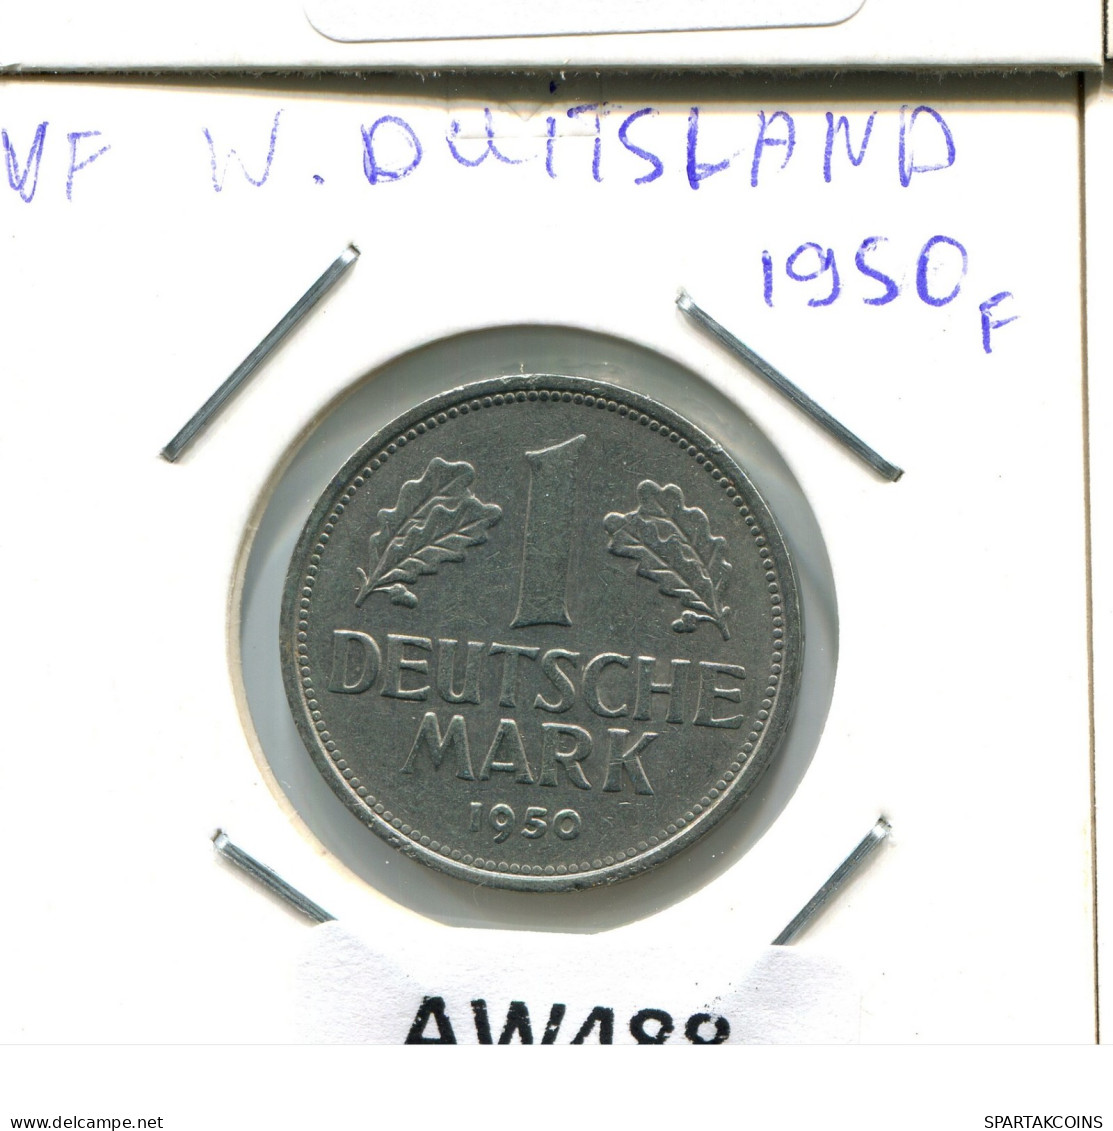 1 DM 1950 F GERMANY Coin #AW488.U.A - 1 Marco